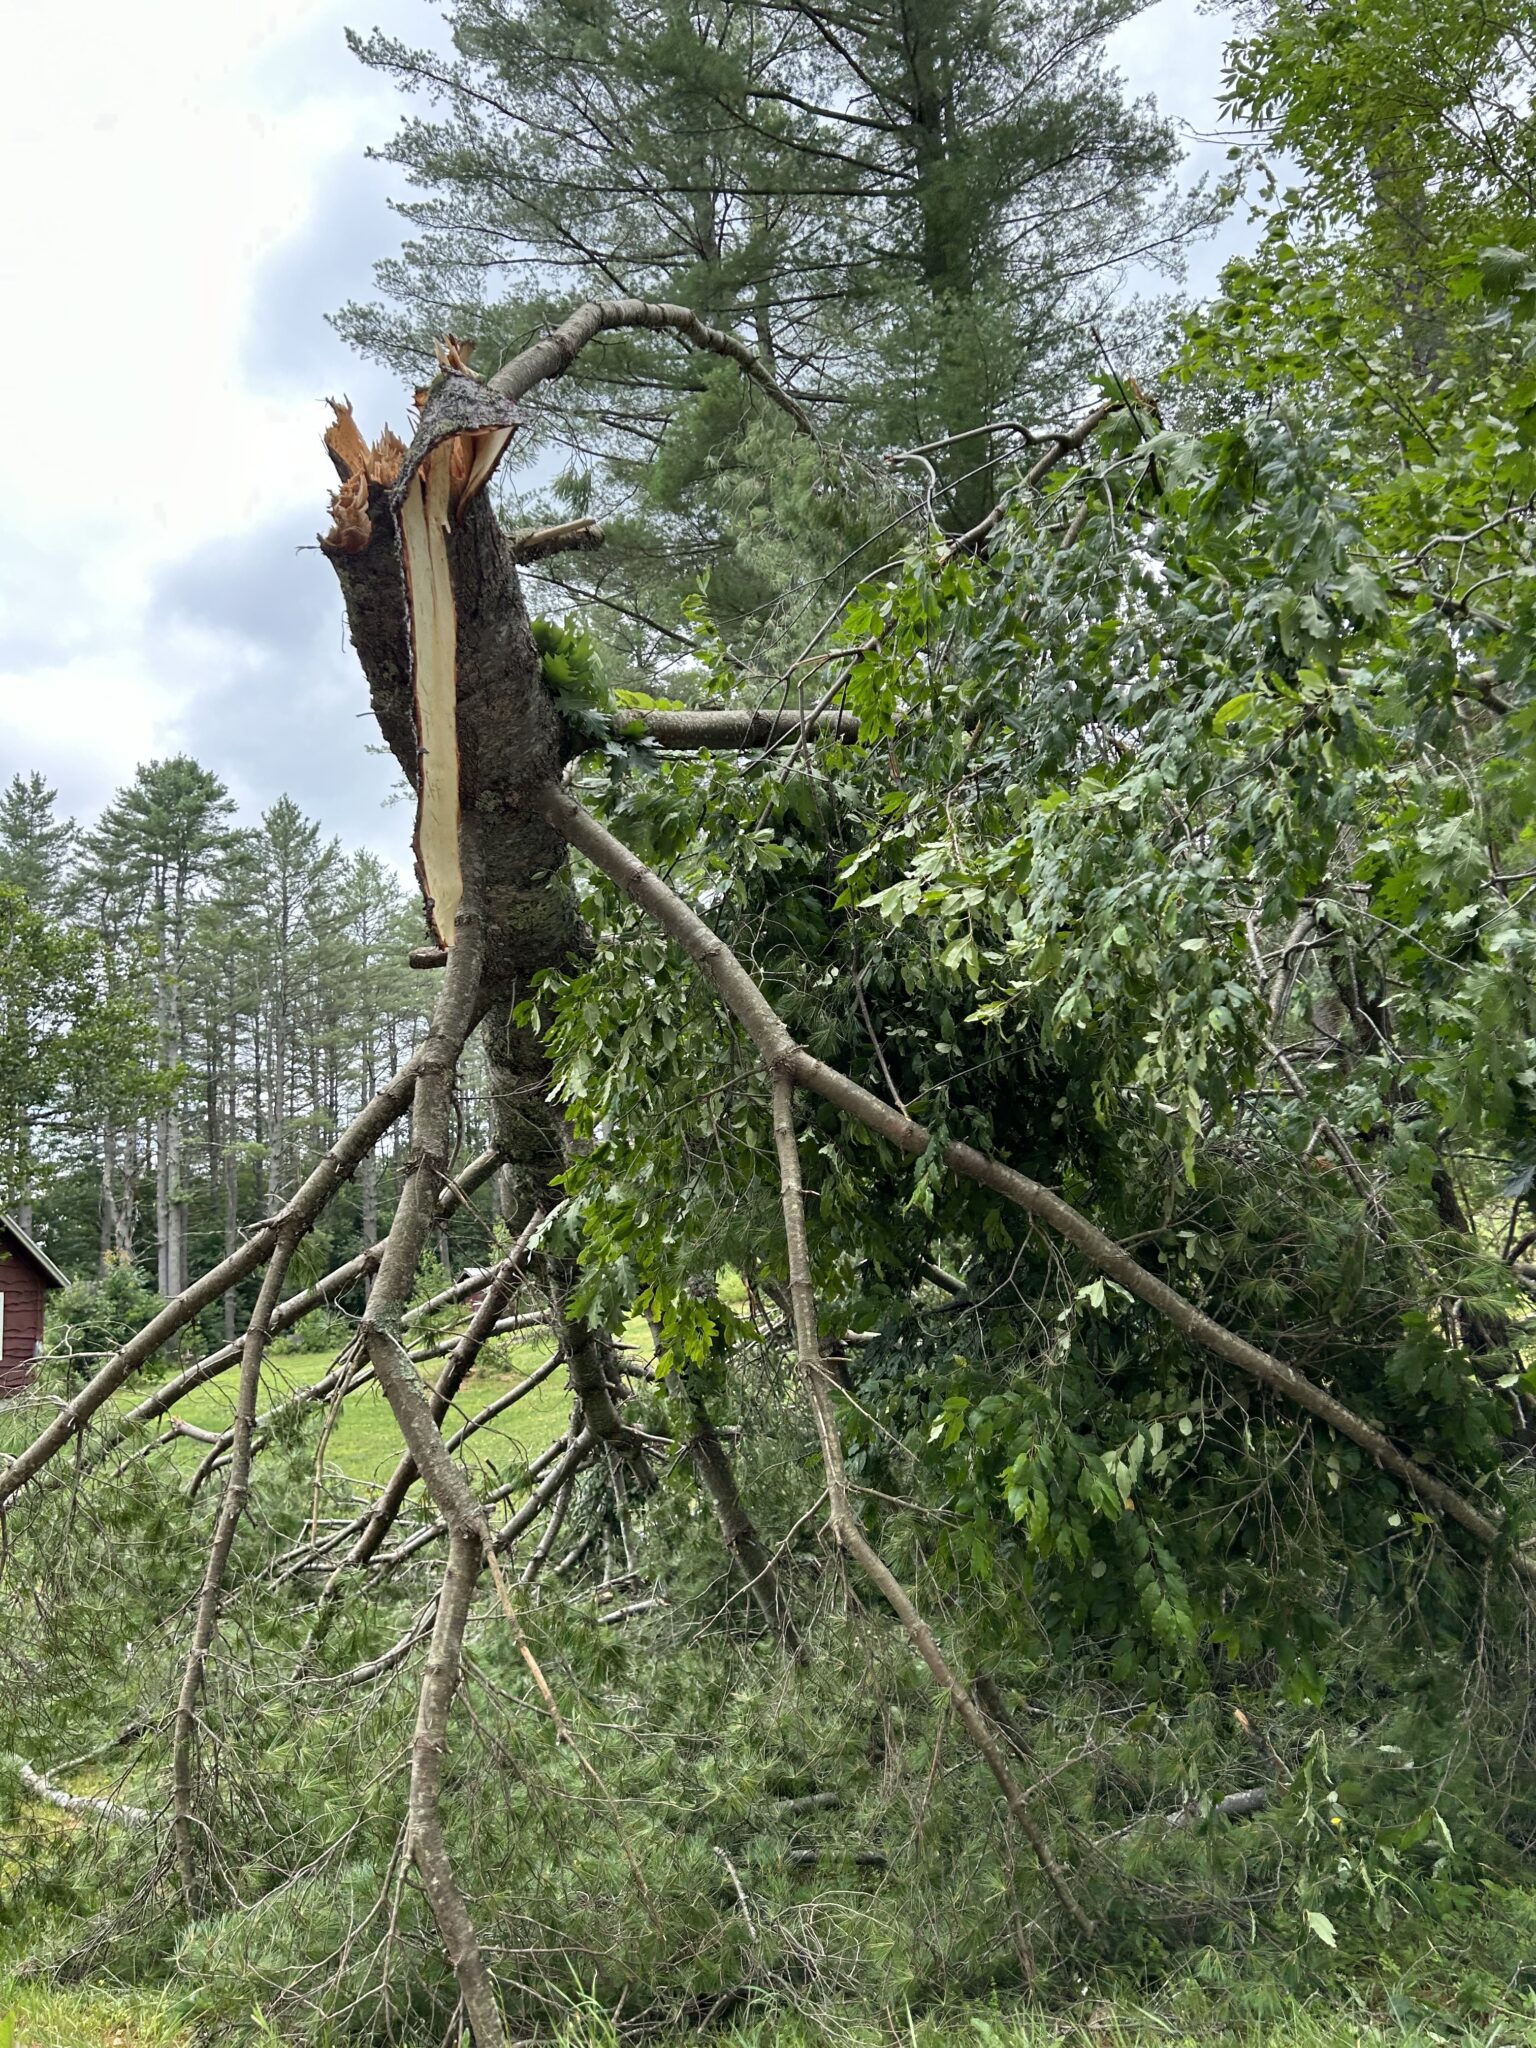 Post-storm investigations confirm two additional tornadoes in the Adirondacks